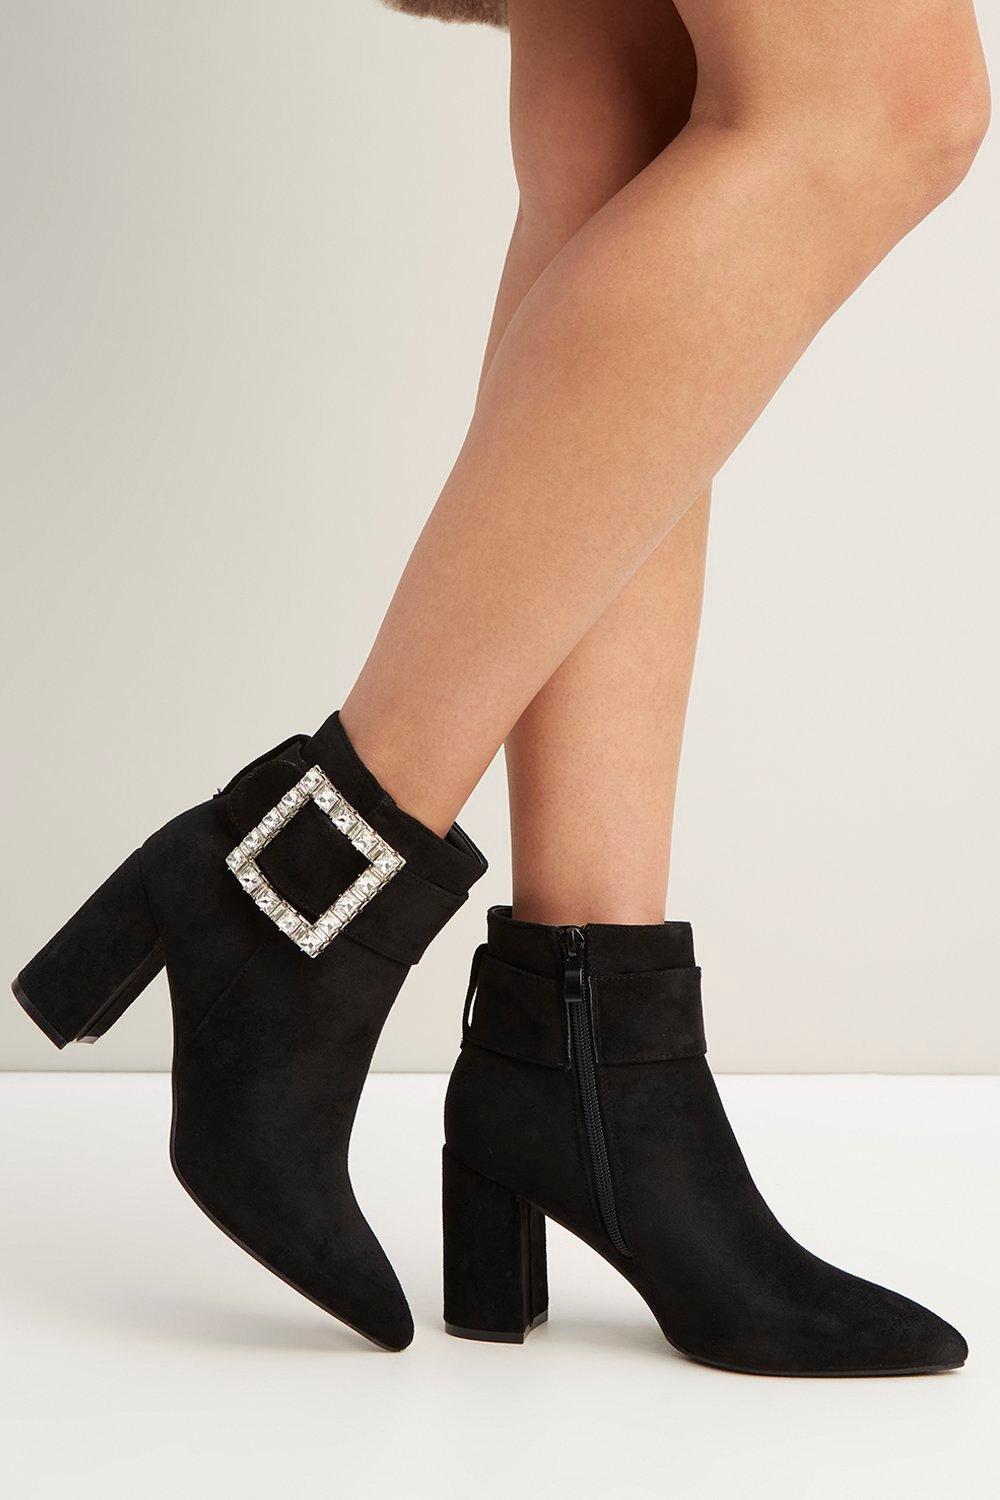 Boots | Annabelle Embellished Ankle Boot | Wallis